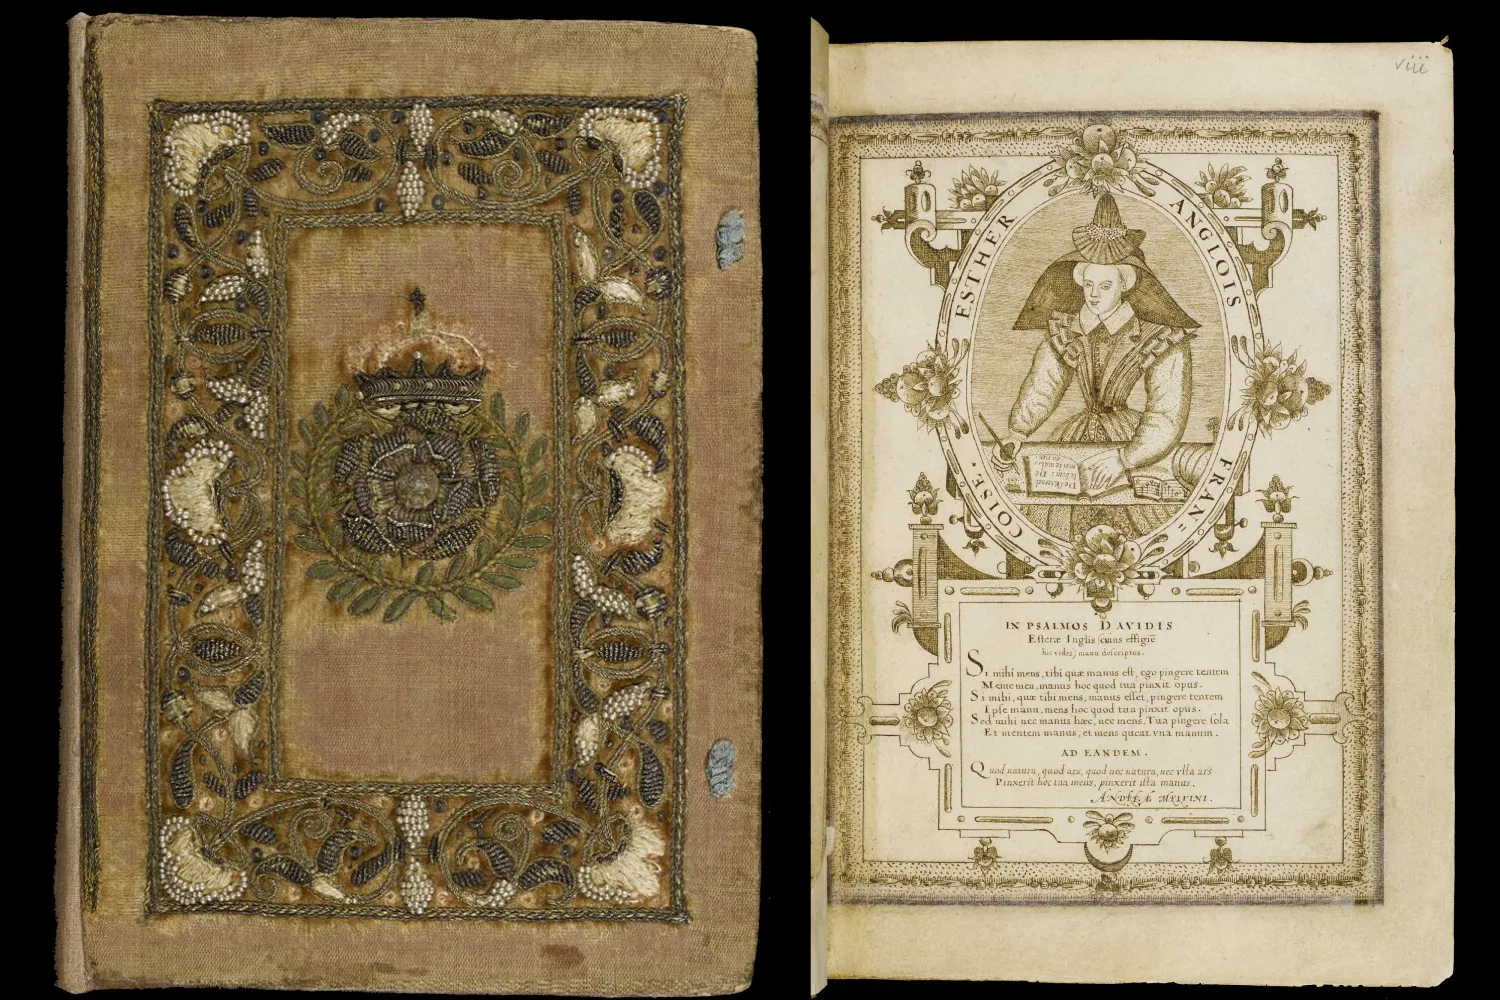 Photographs of the binding and opening page of Inglis' book of Psalms